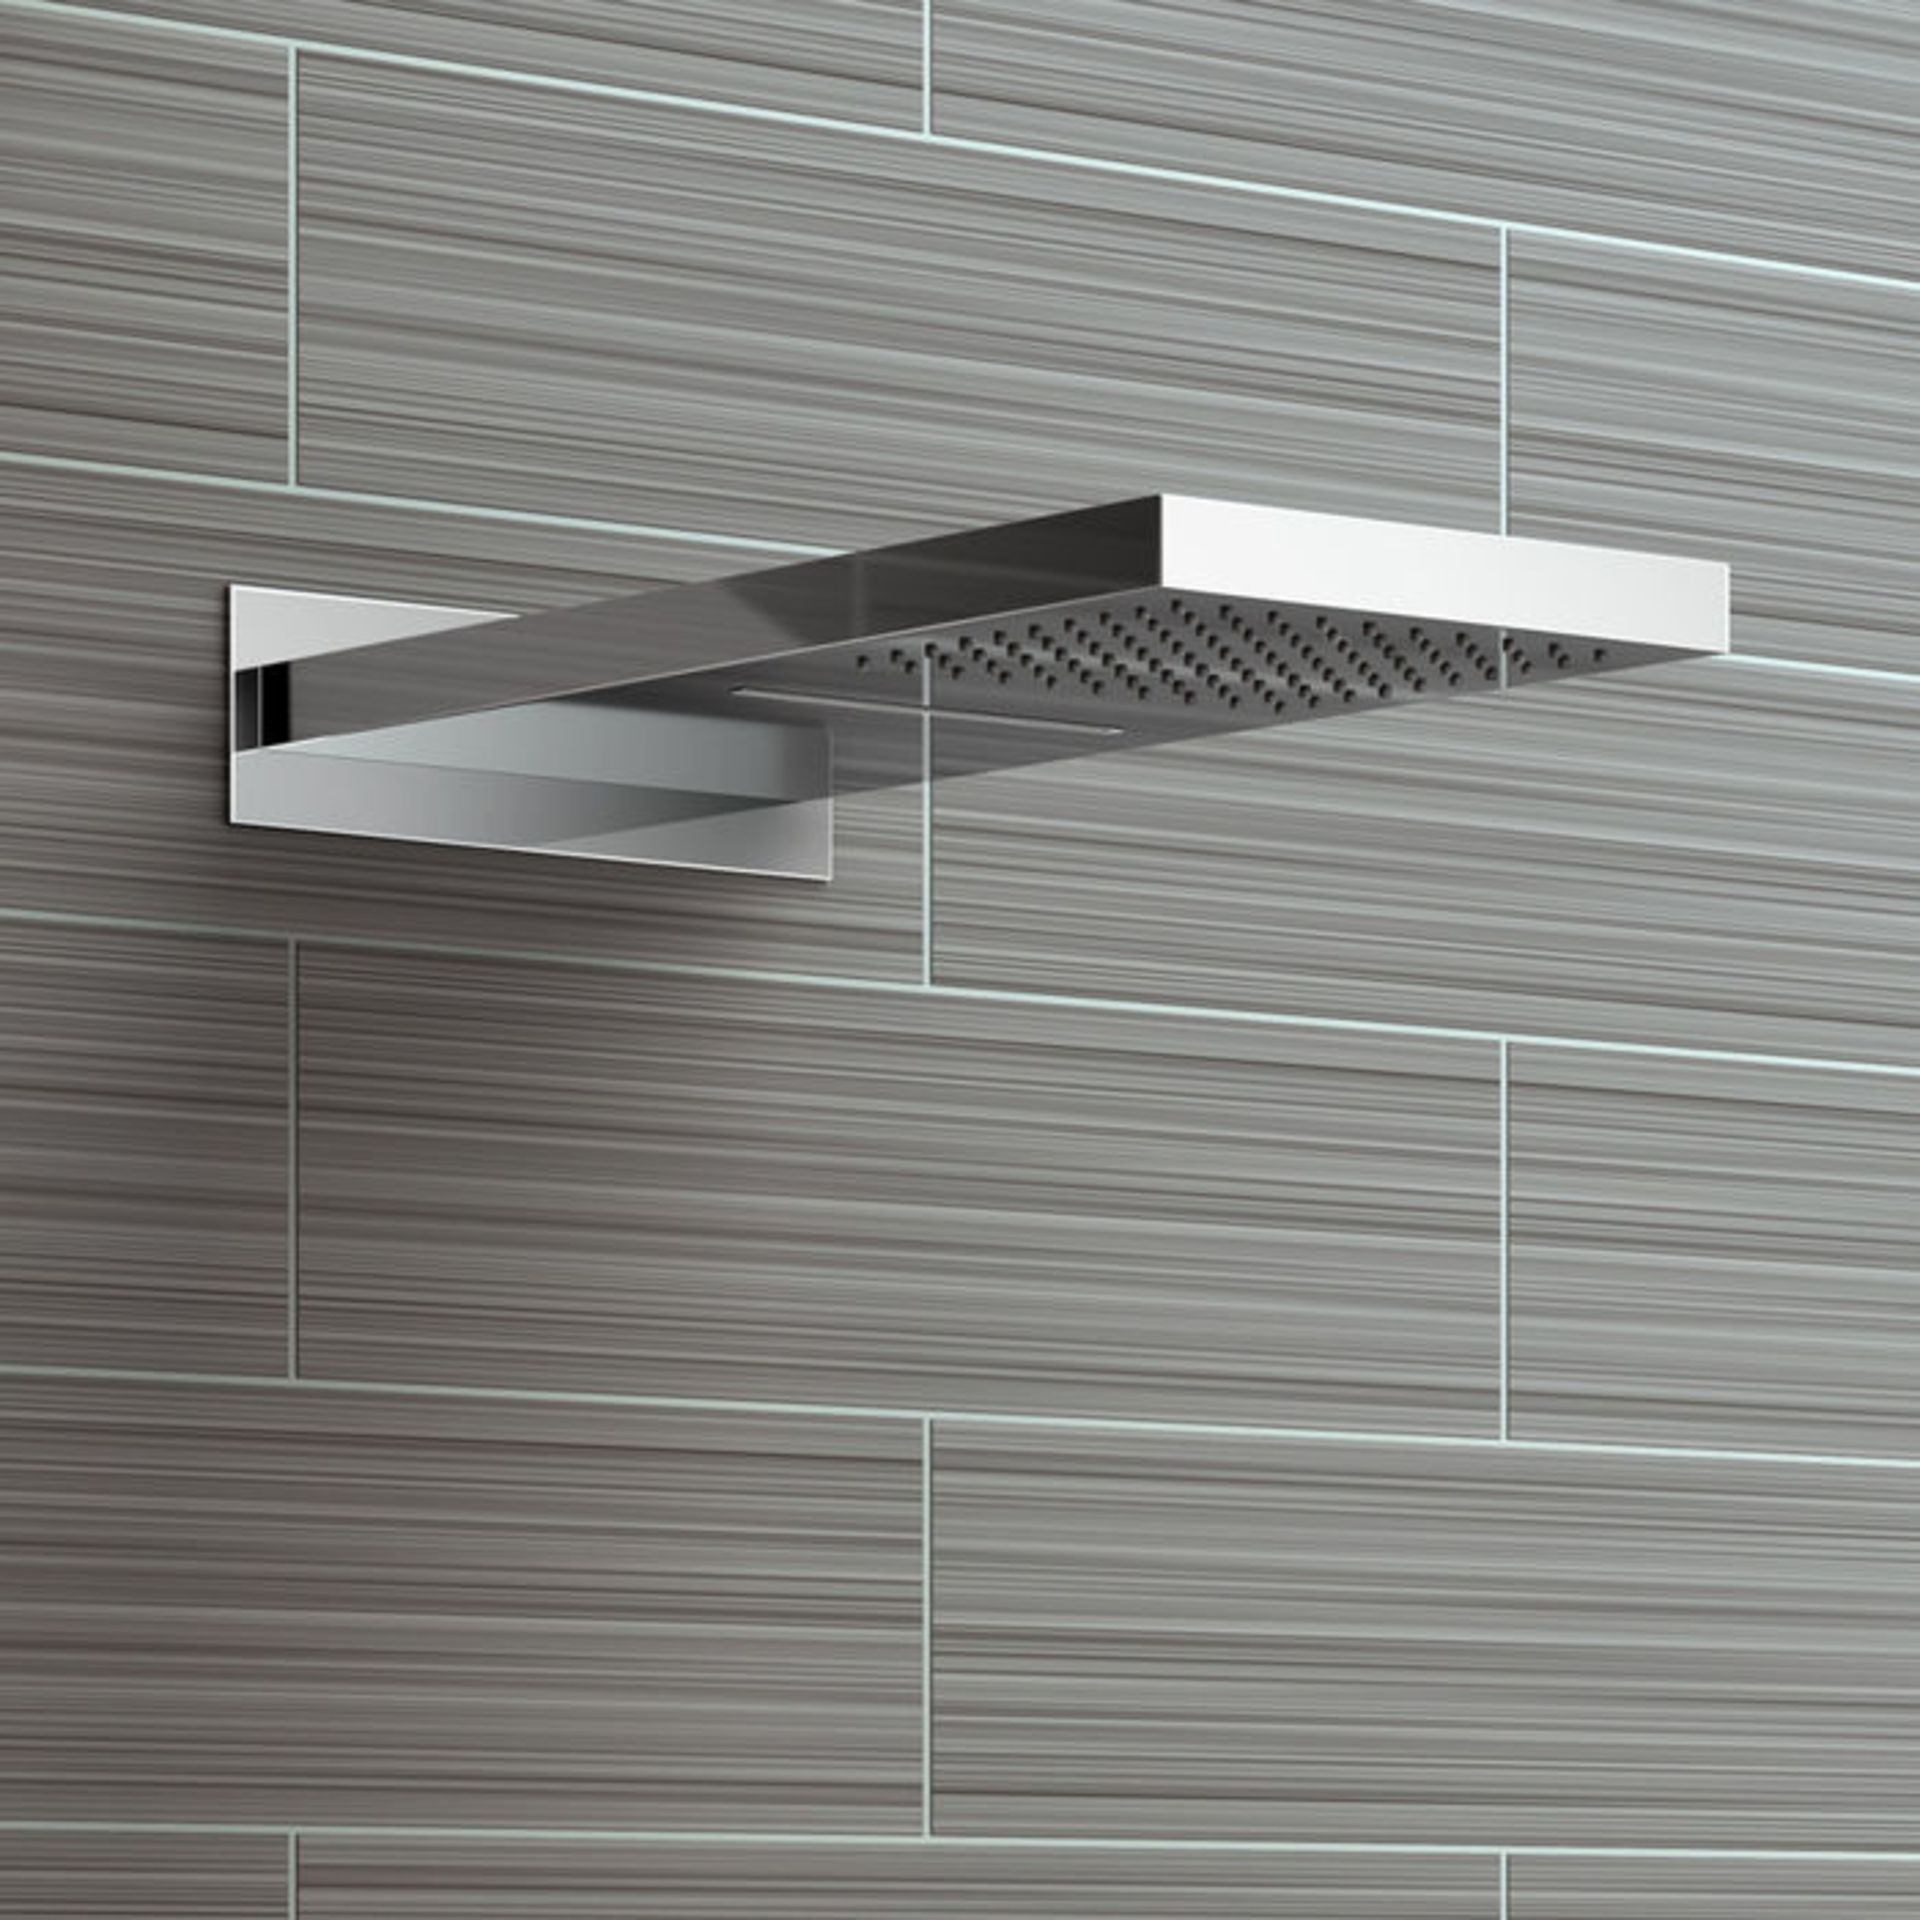 (DK51) Stainless Steel 230x500mm Waterfall Shower Head. RRP £374.99. Dual function waterfall and - Image 4 of 7